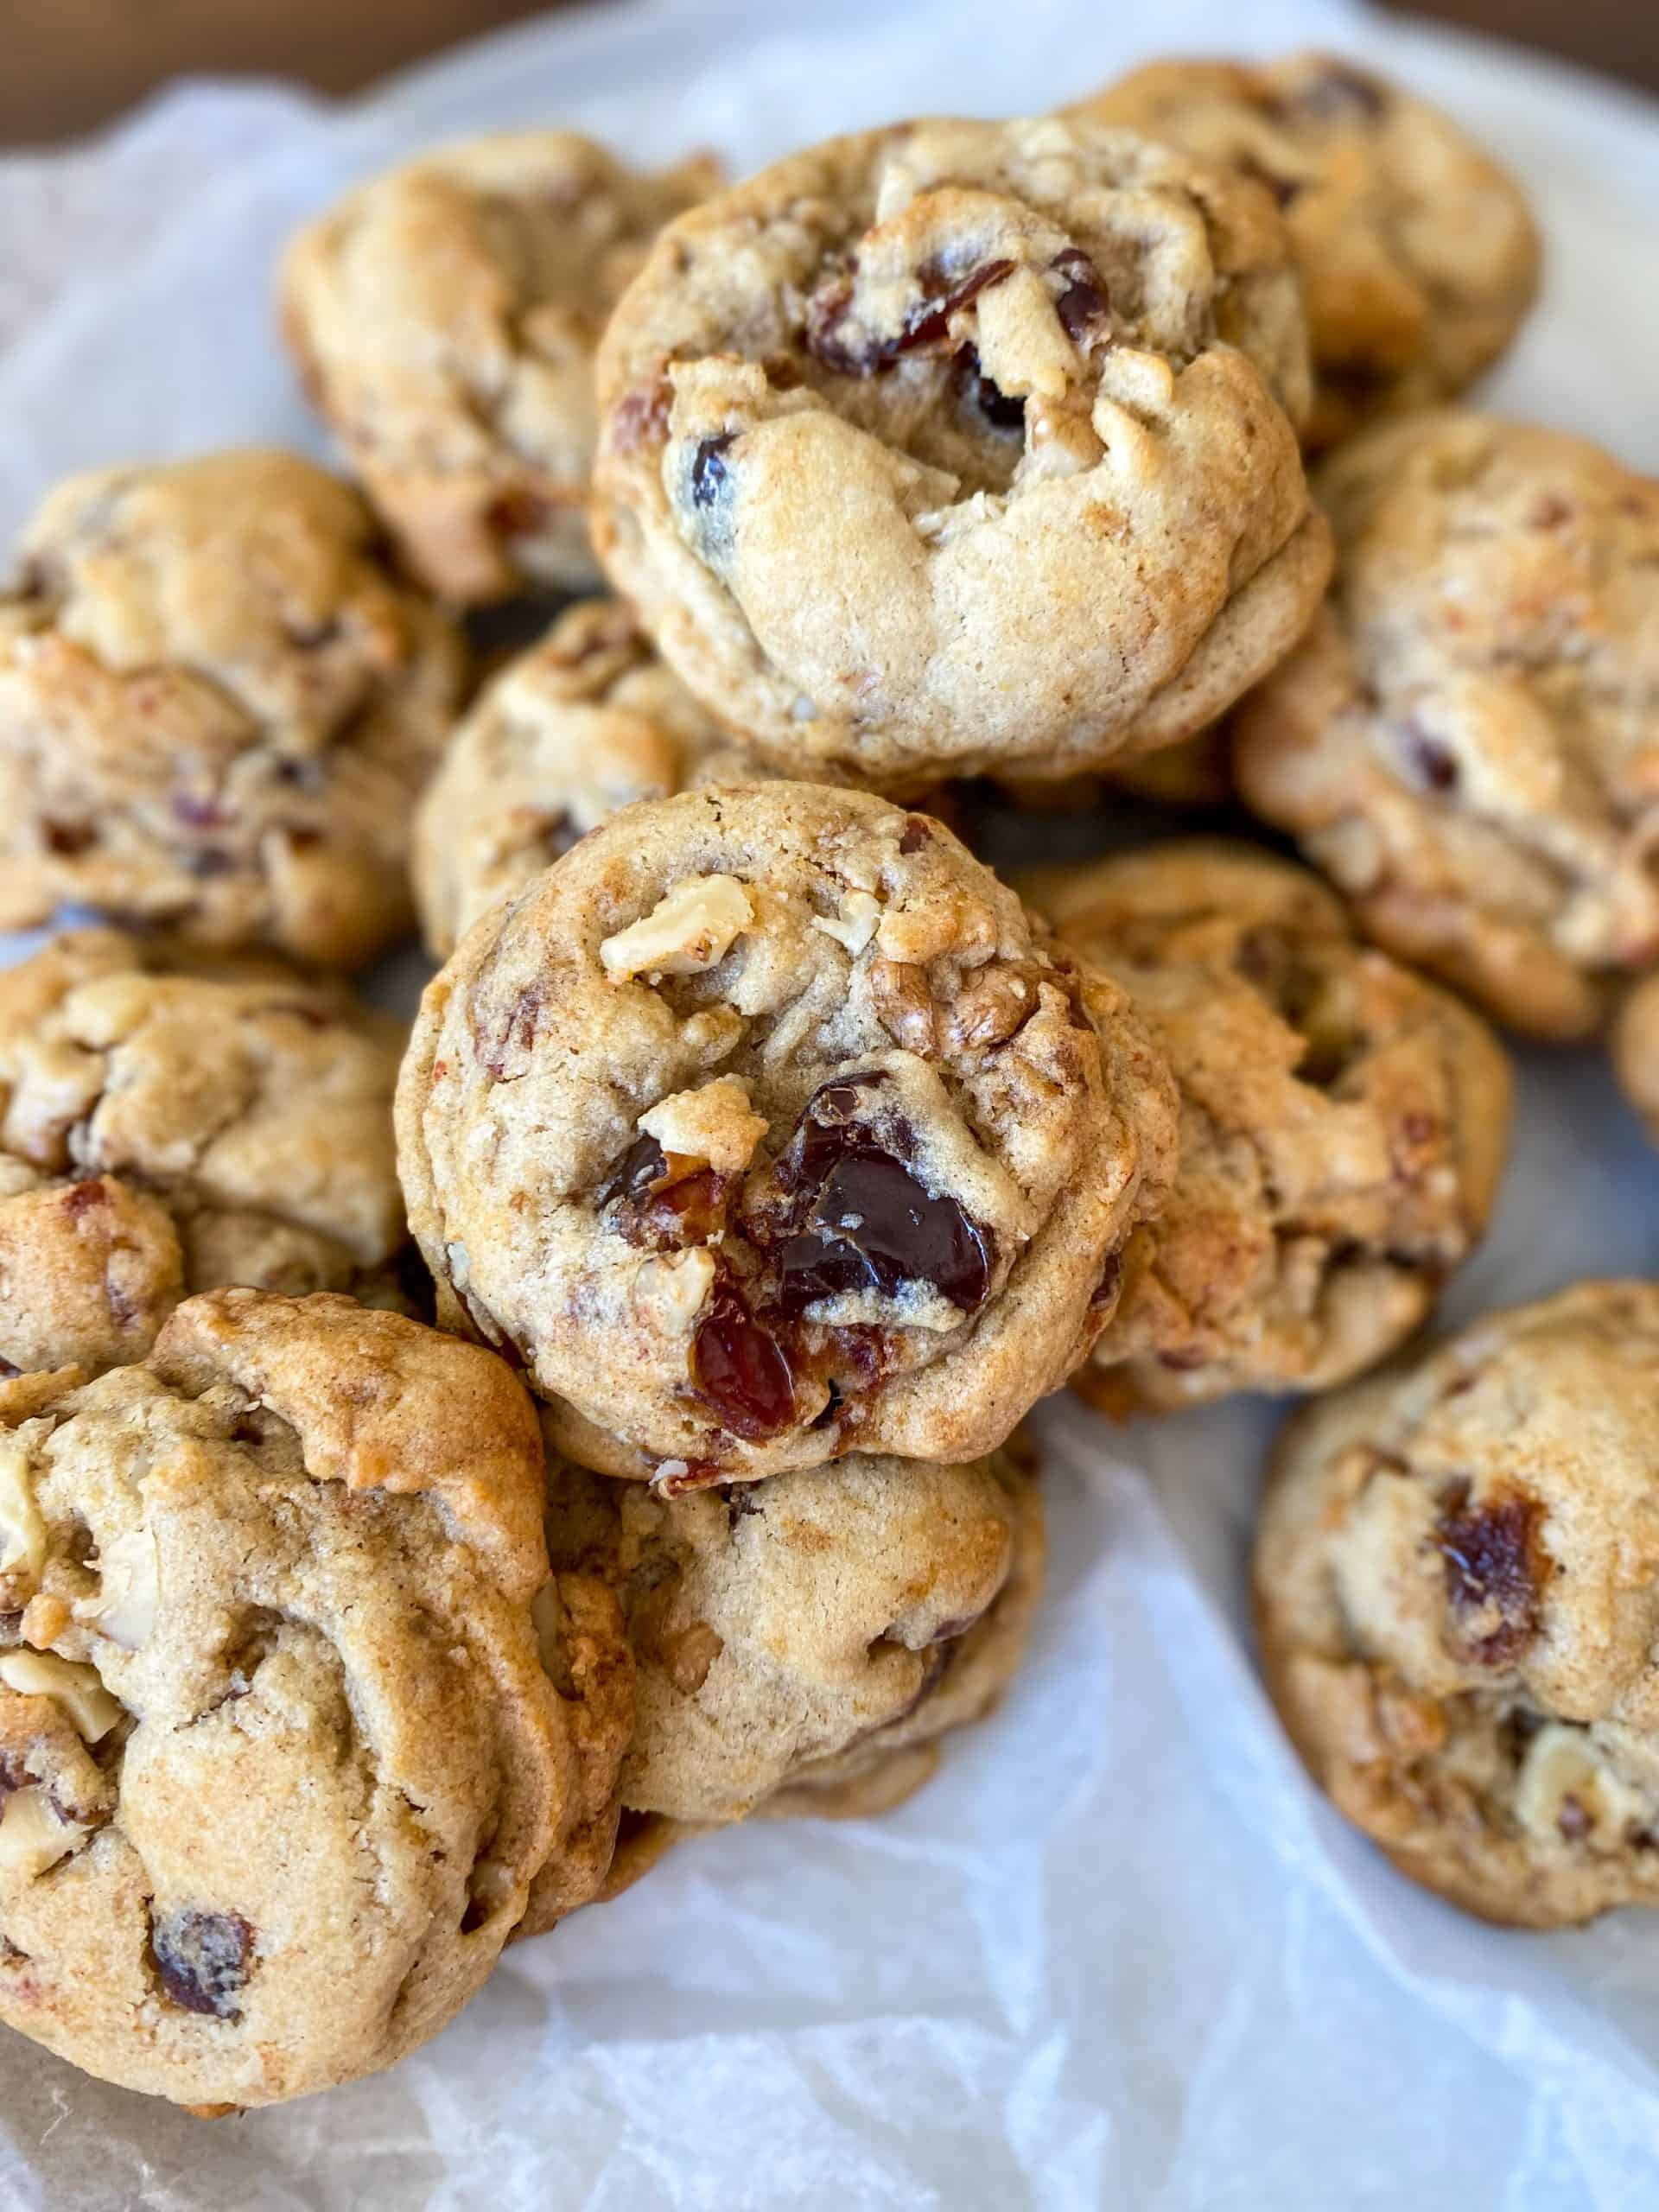 chewy and soft date walnut cookies with bits of dates and walnuts speckled throughout